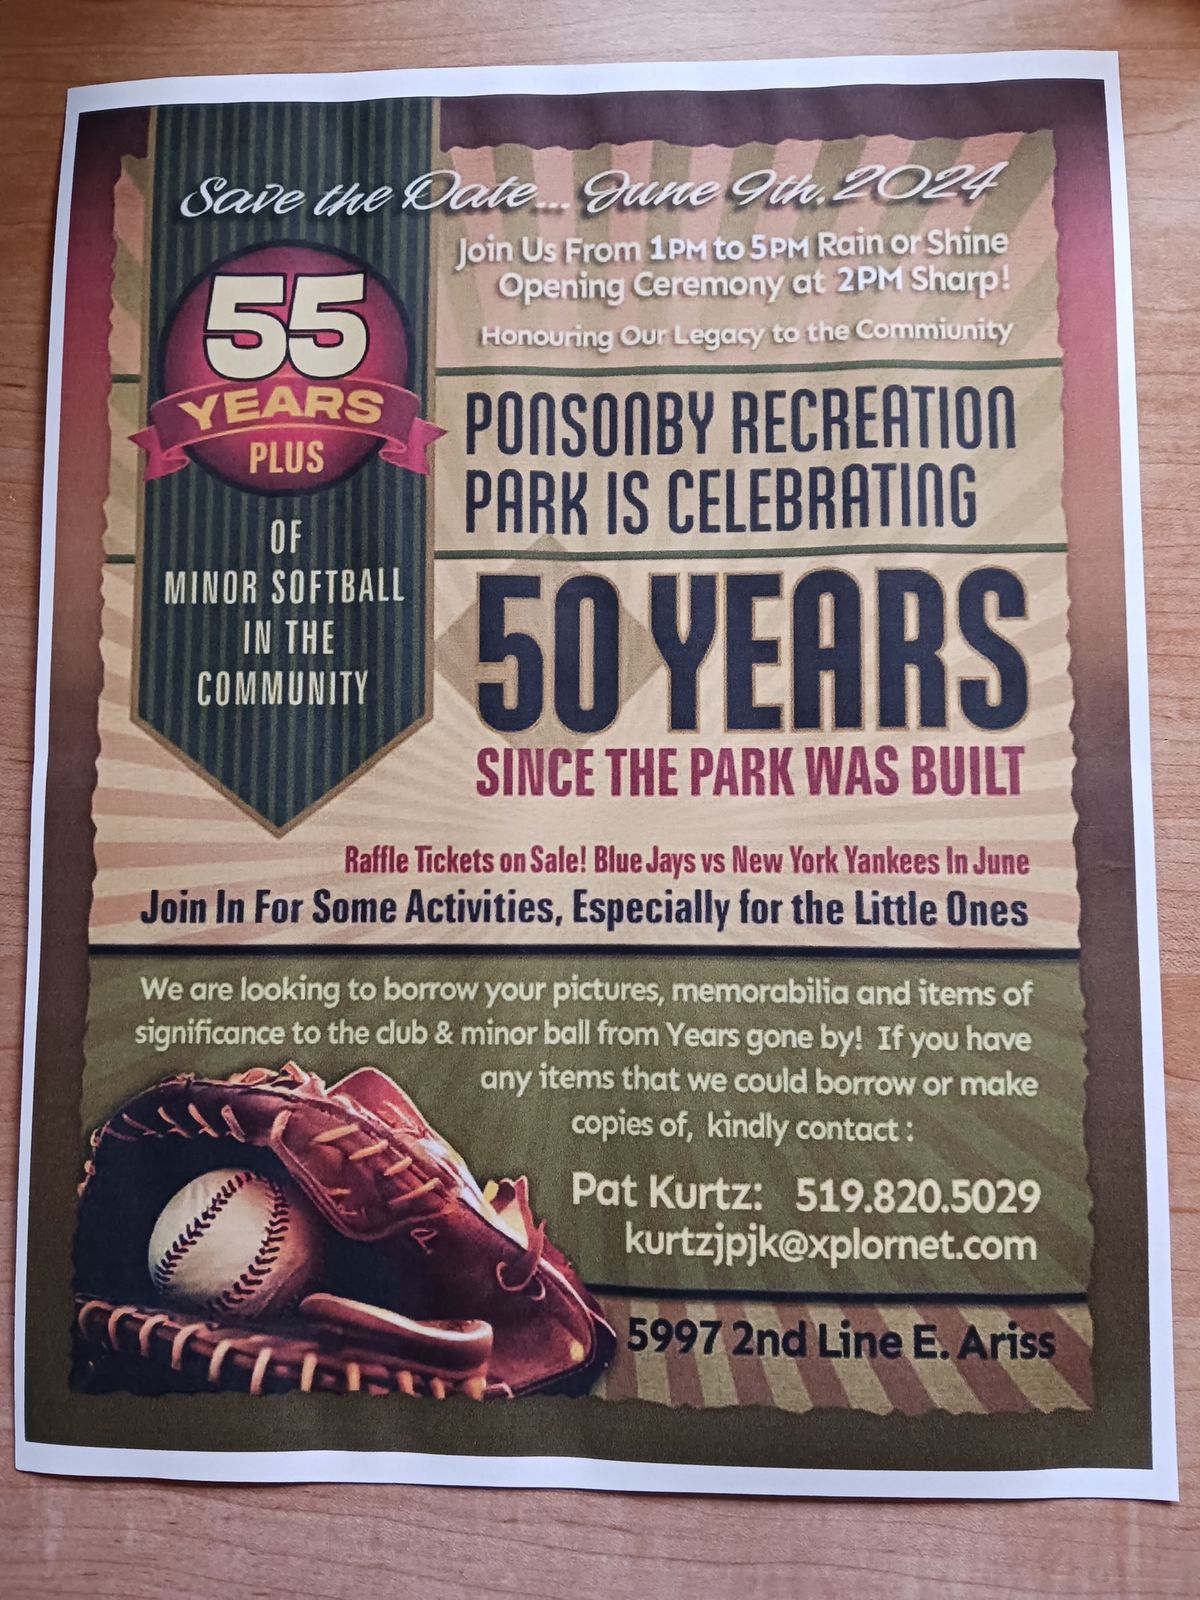 Ponsonby Minor Softball Celebrates 55 + years in the Community and the Park 50 Years 